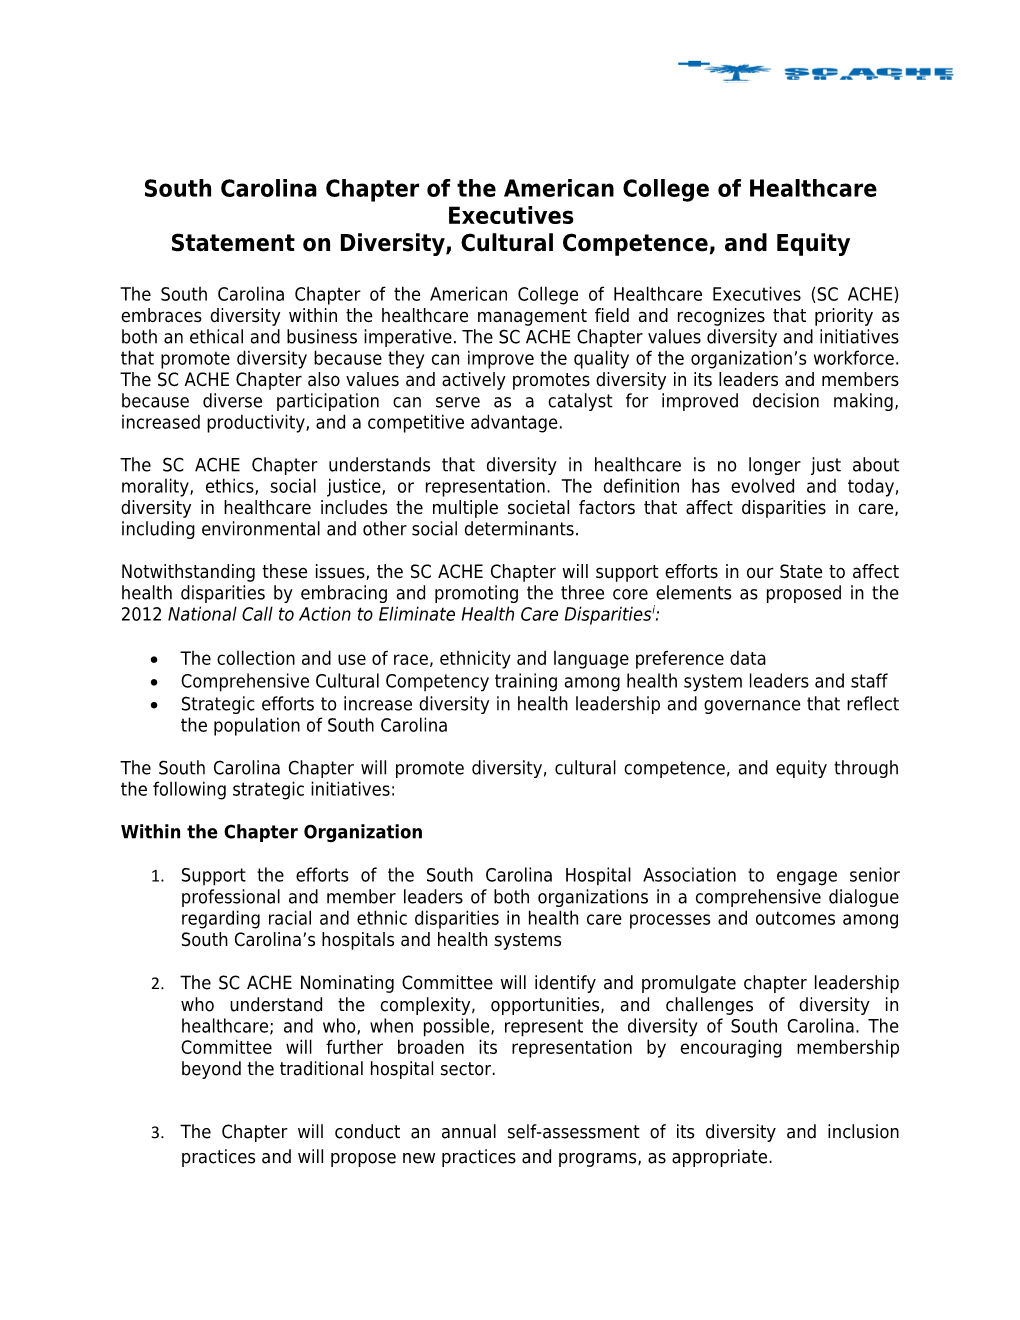 South Carolina Chapter of the American College of Healthcare Executives